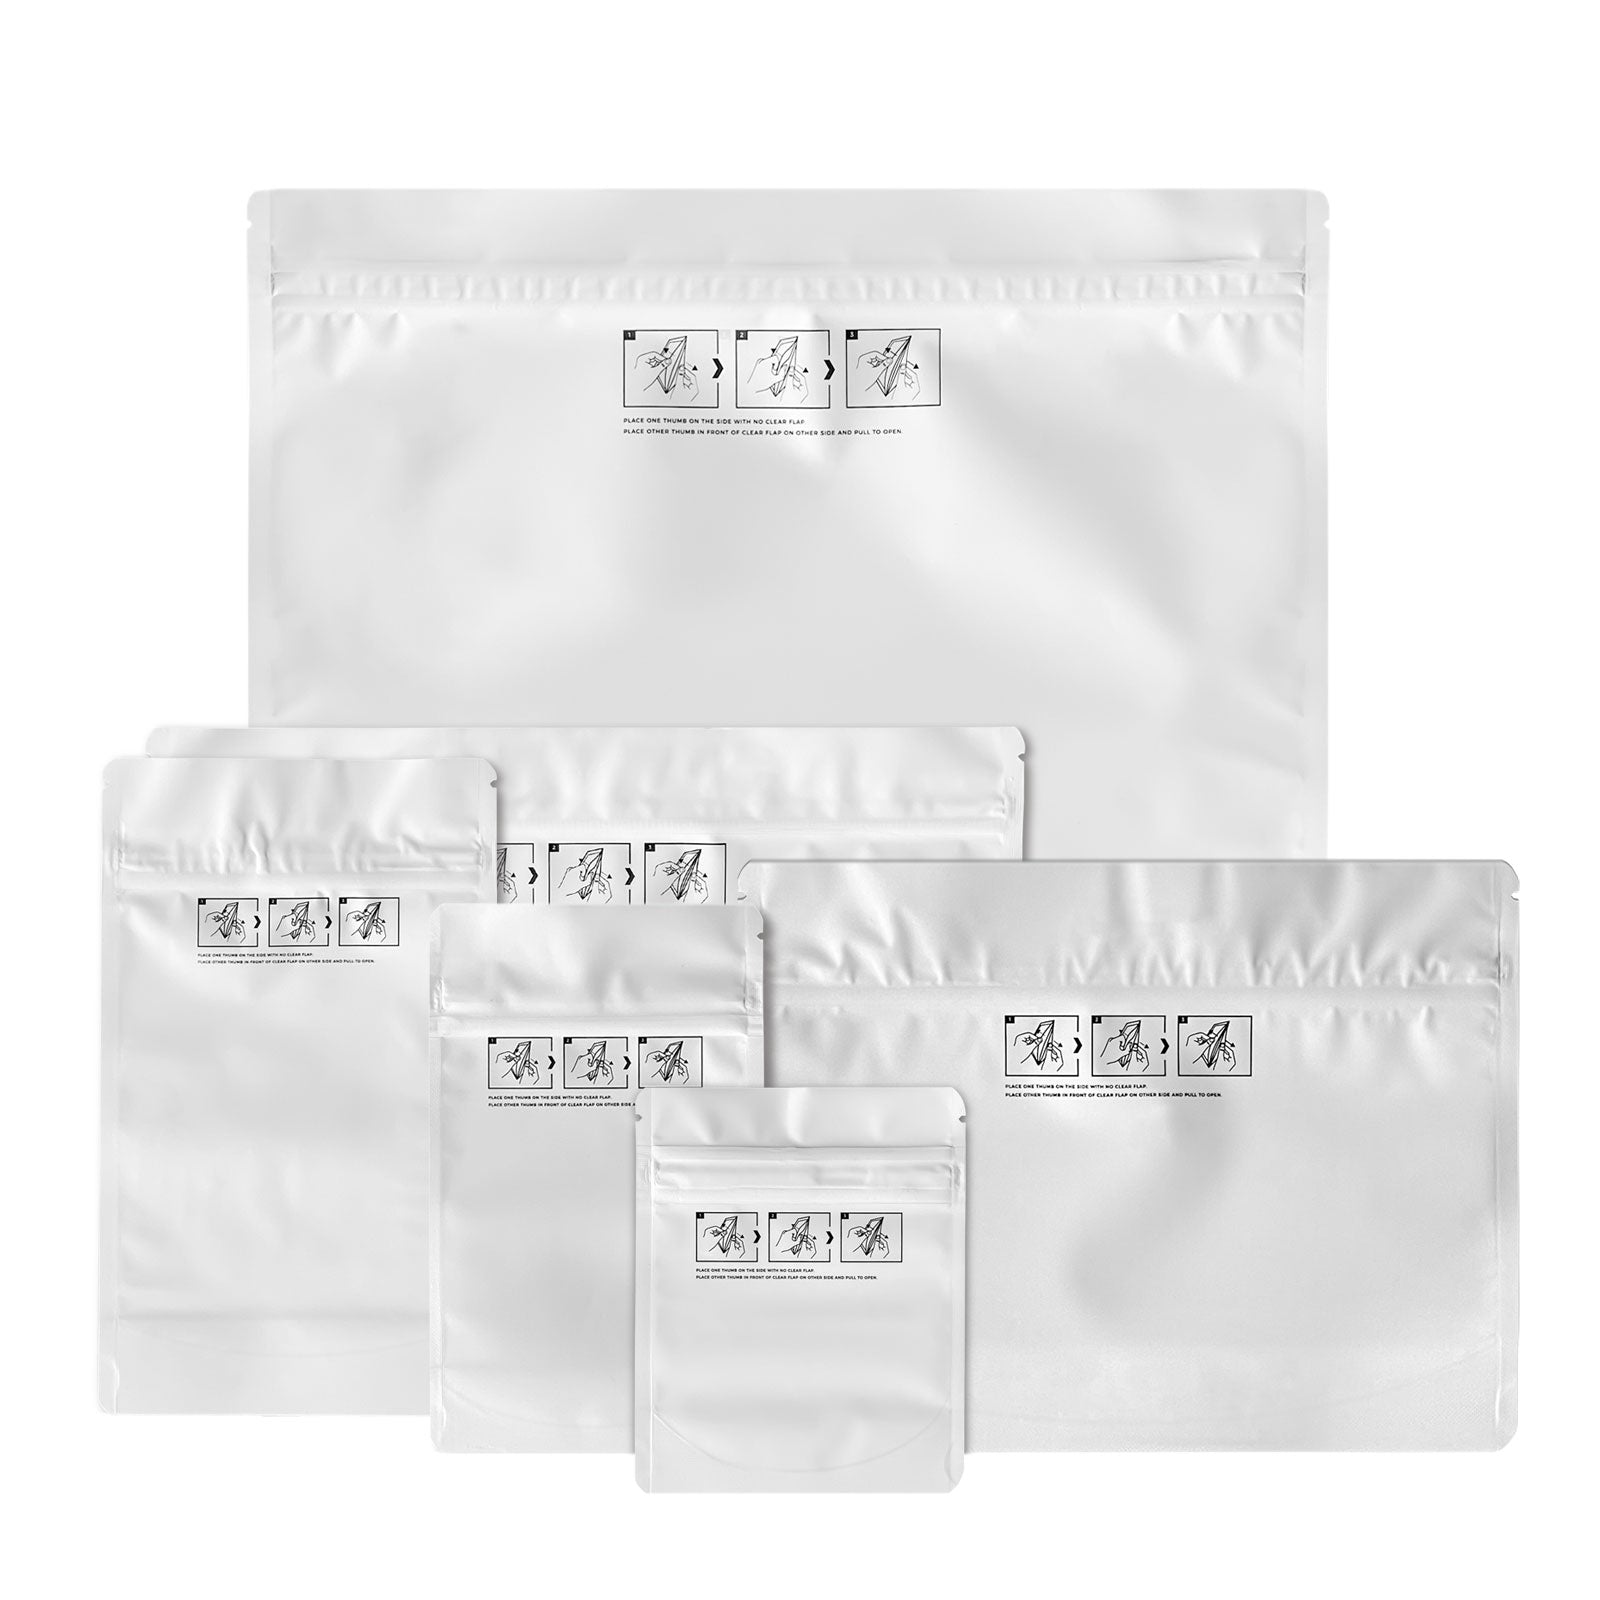 1/8 Ounce Child Resistant Bags All White 4"x5"+2" - 100 Count